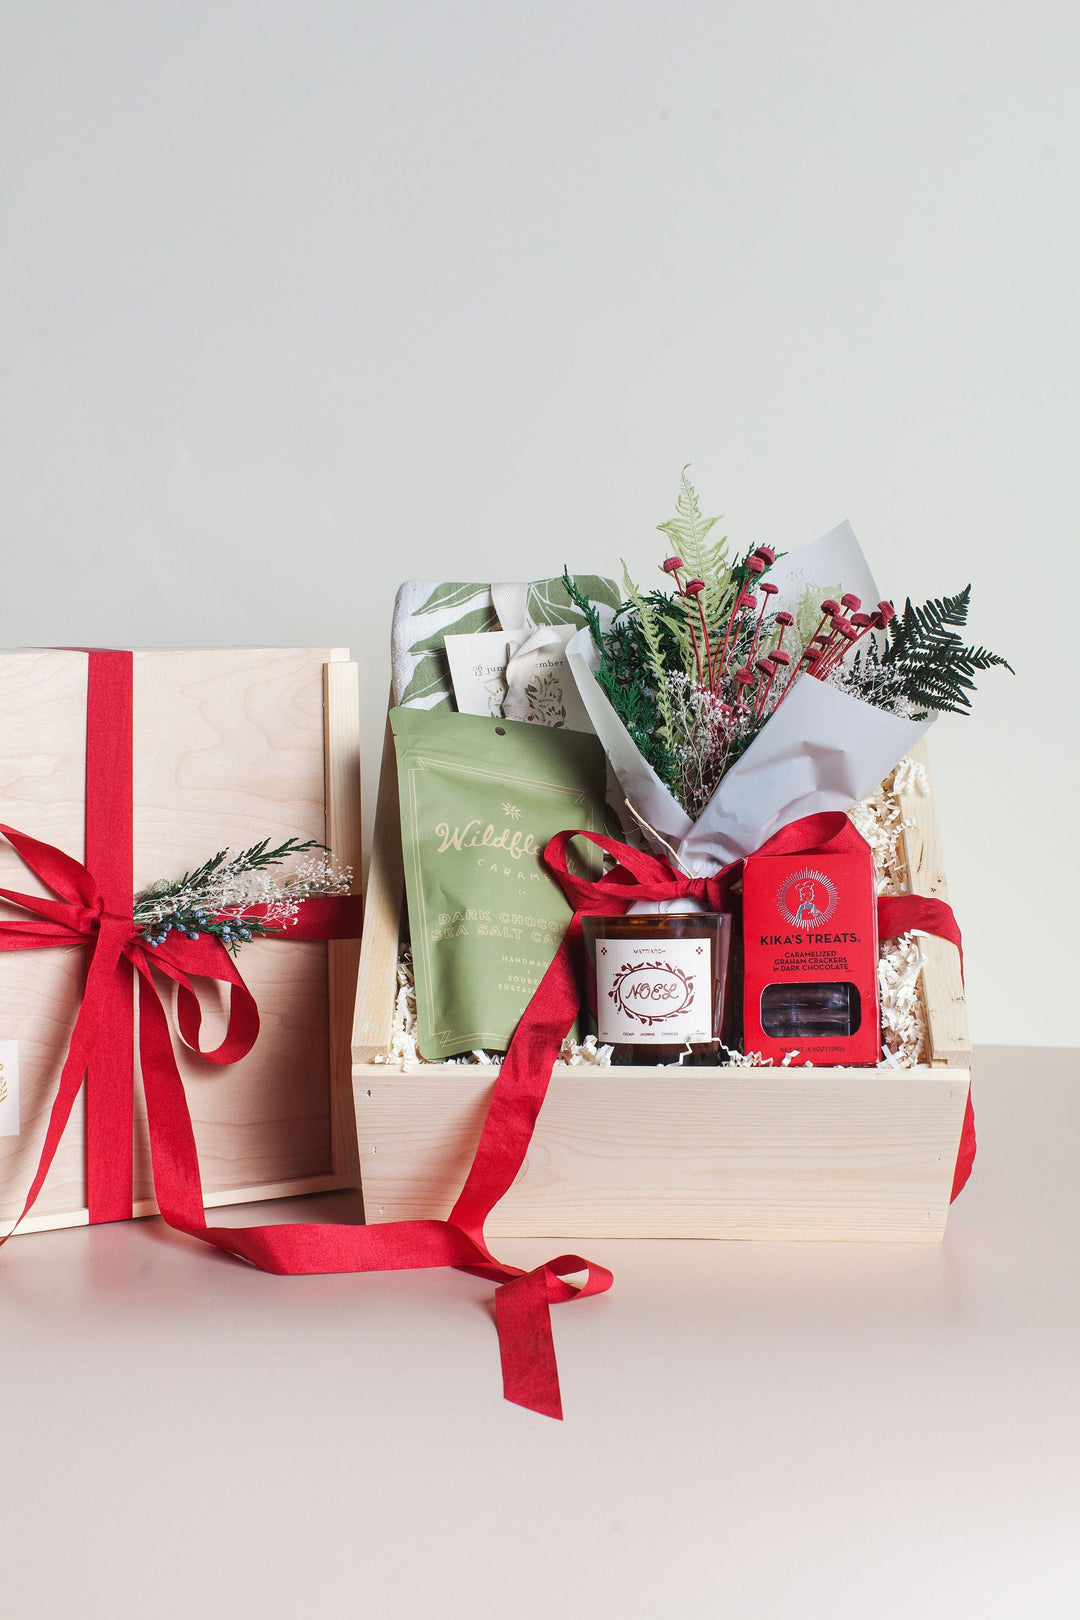 Idlewild Floral Co. Gift Giving Noel Gift Box